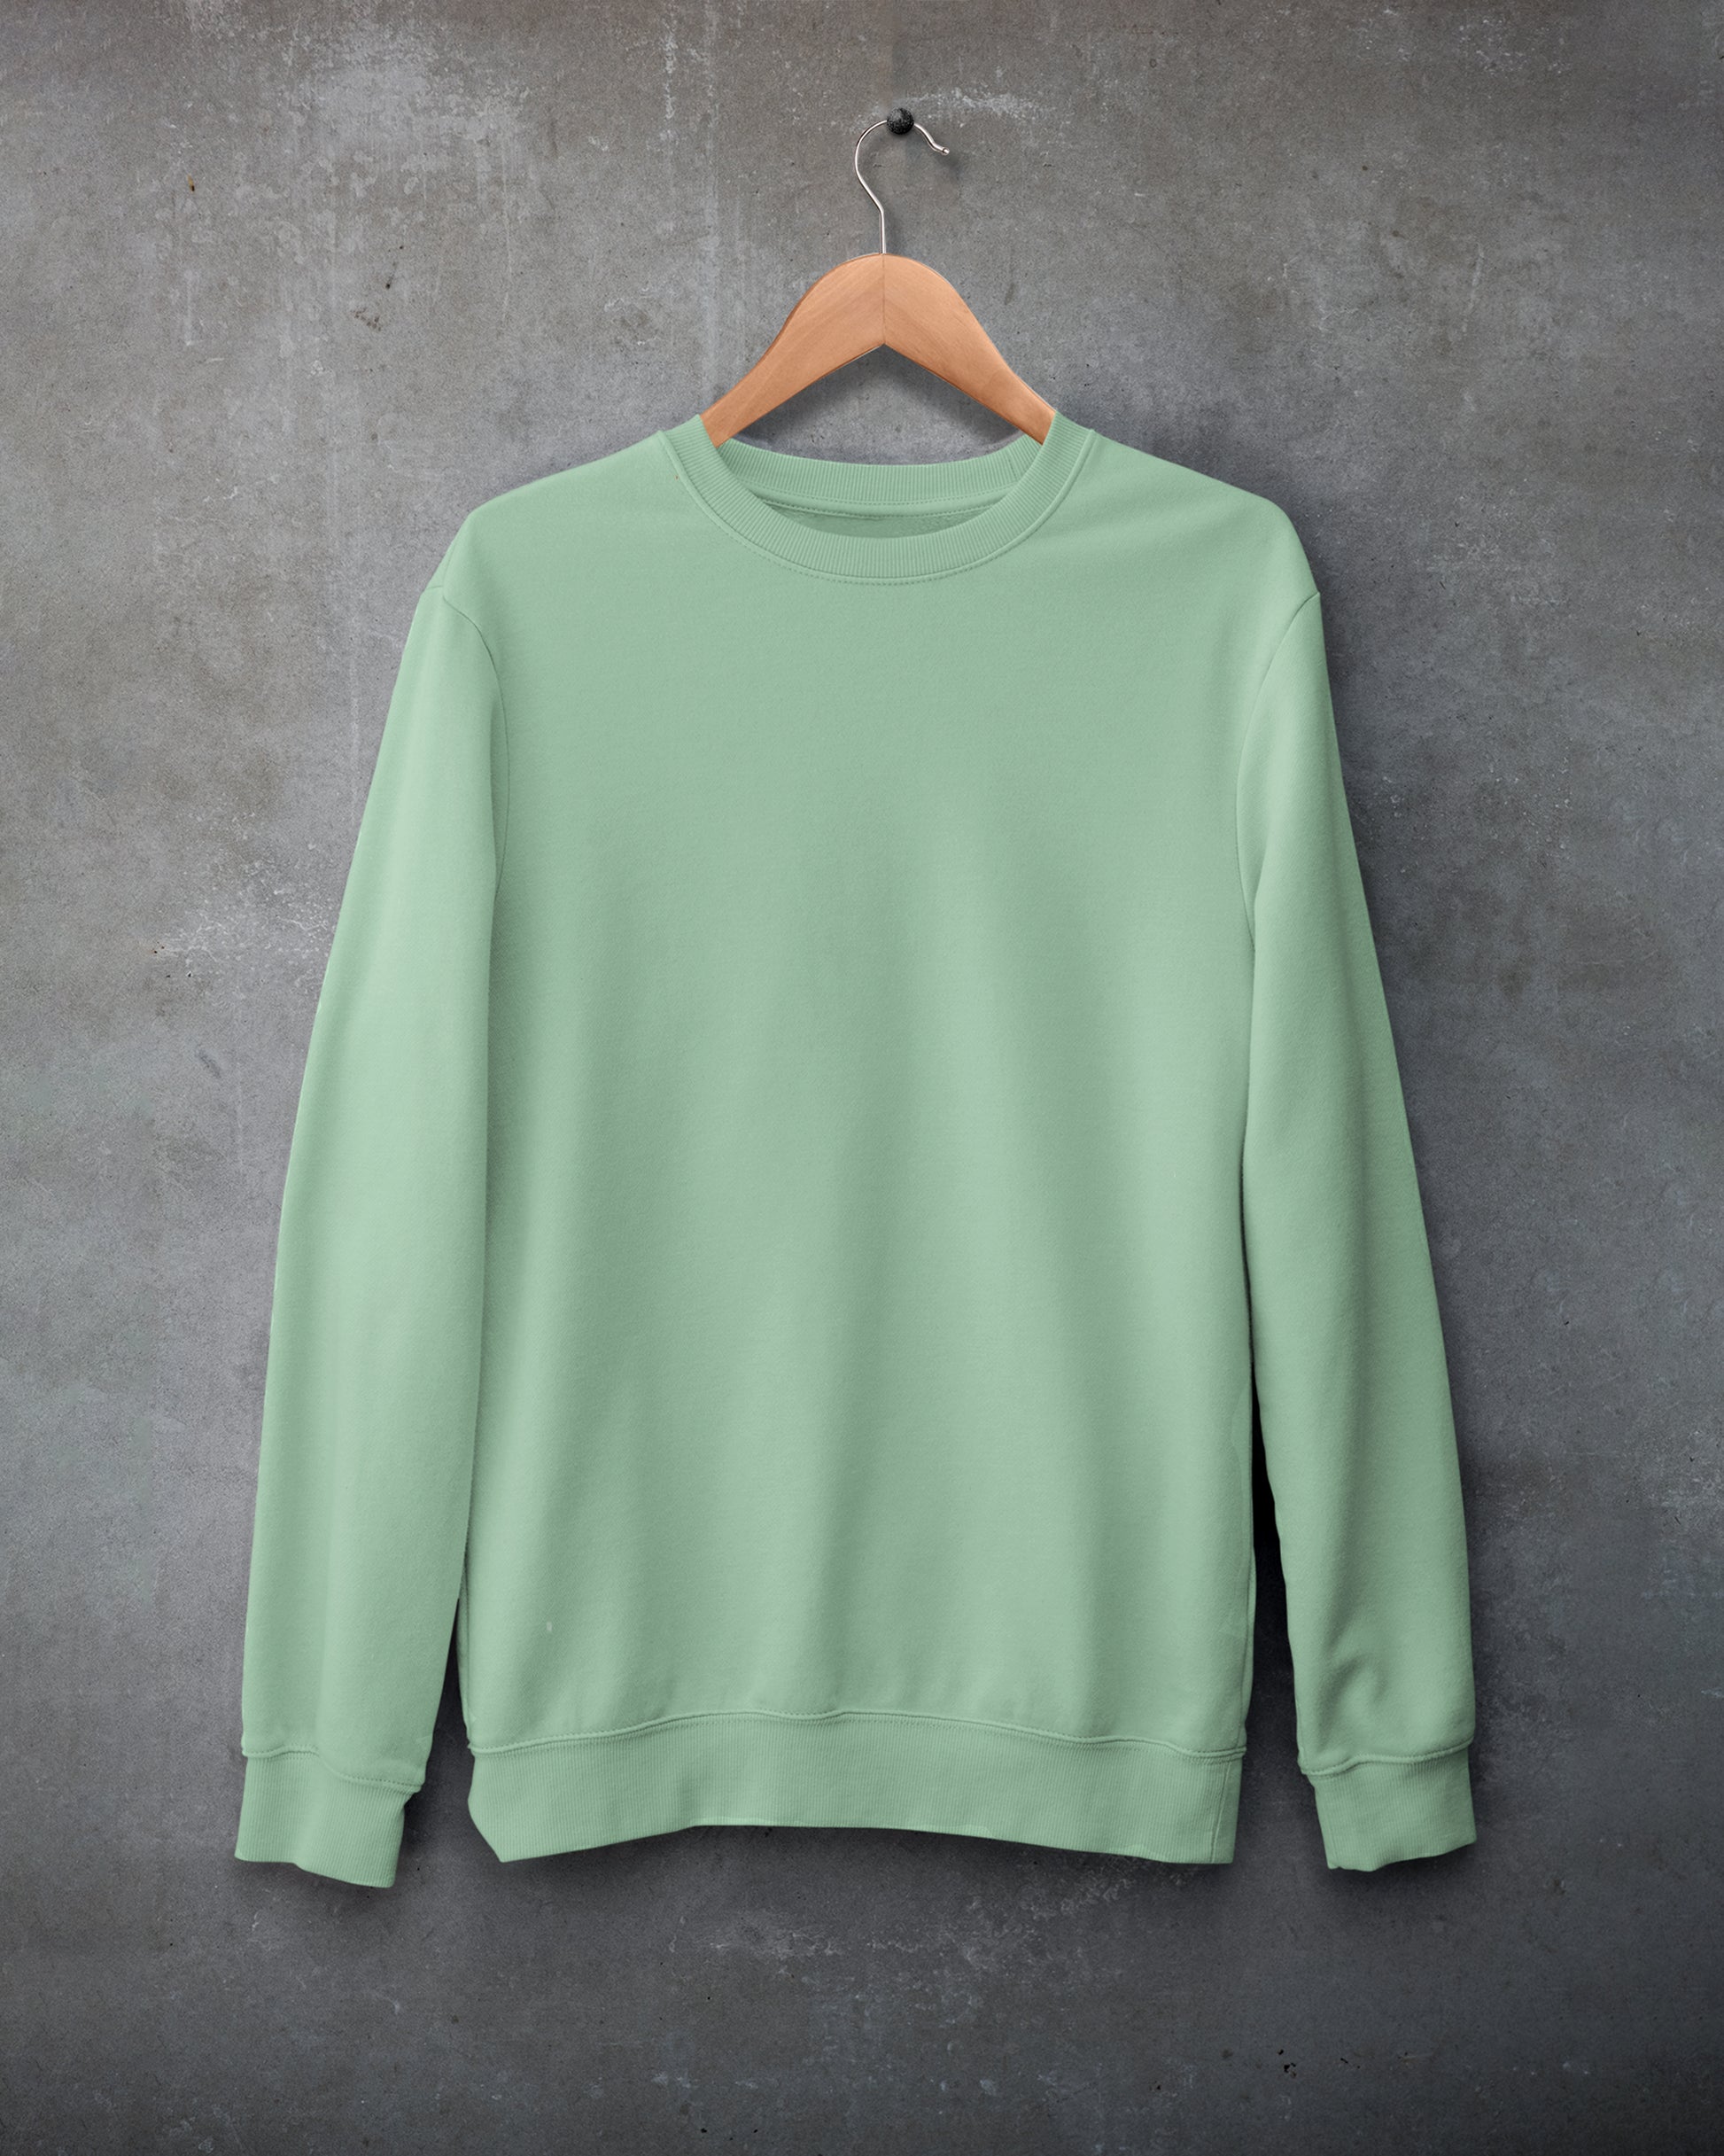 Shop mint green solid coloured sweatshirts for a fresh look